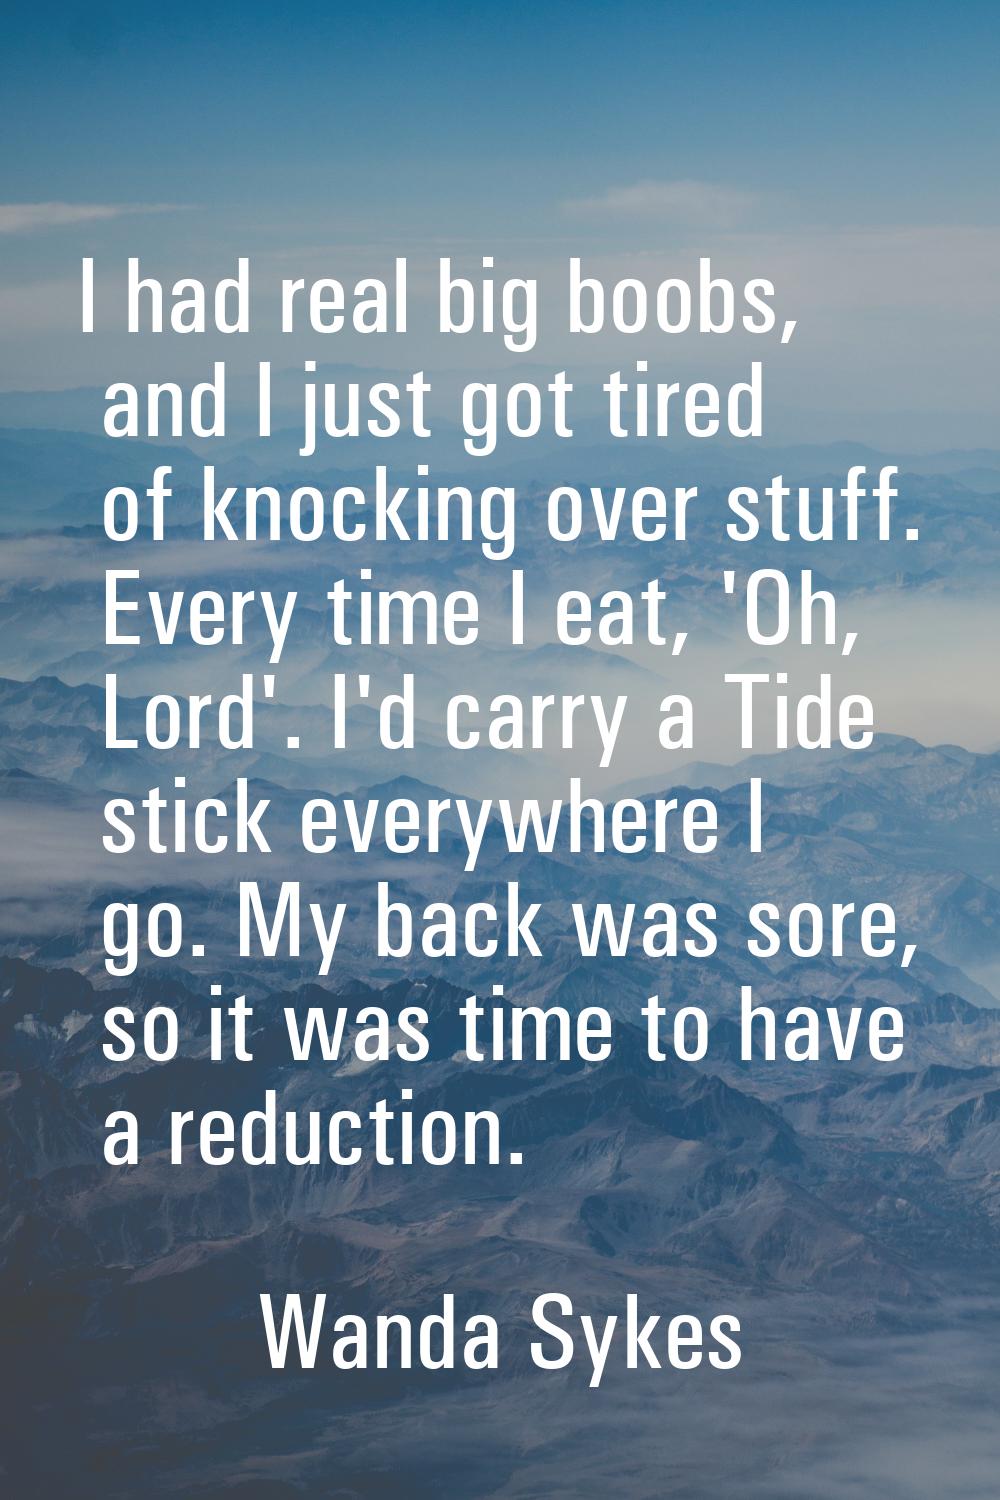 I had real big boobs, and I just got tired of knocking over stuff. Every time I eat, 'Oh, Lord'. I'